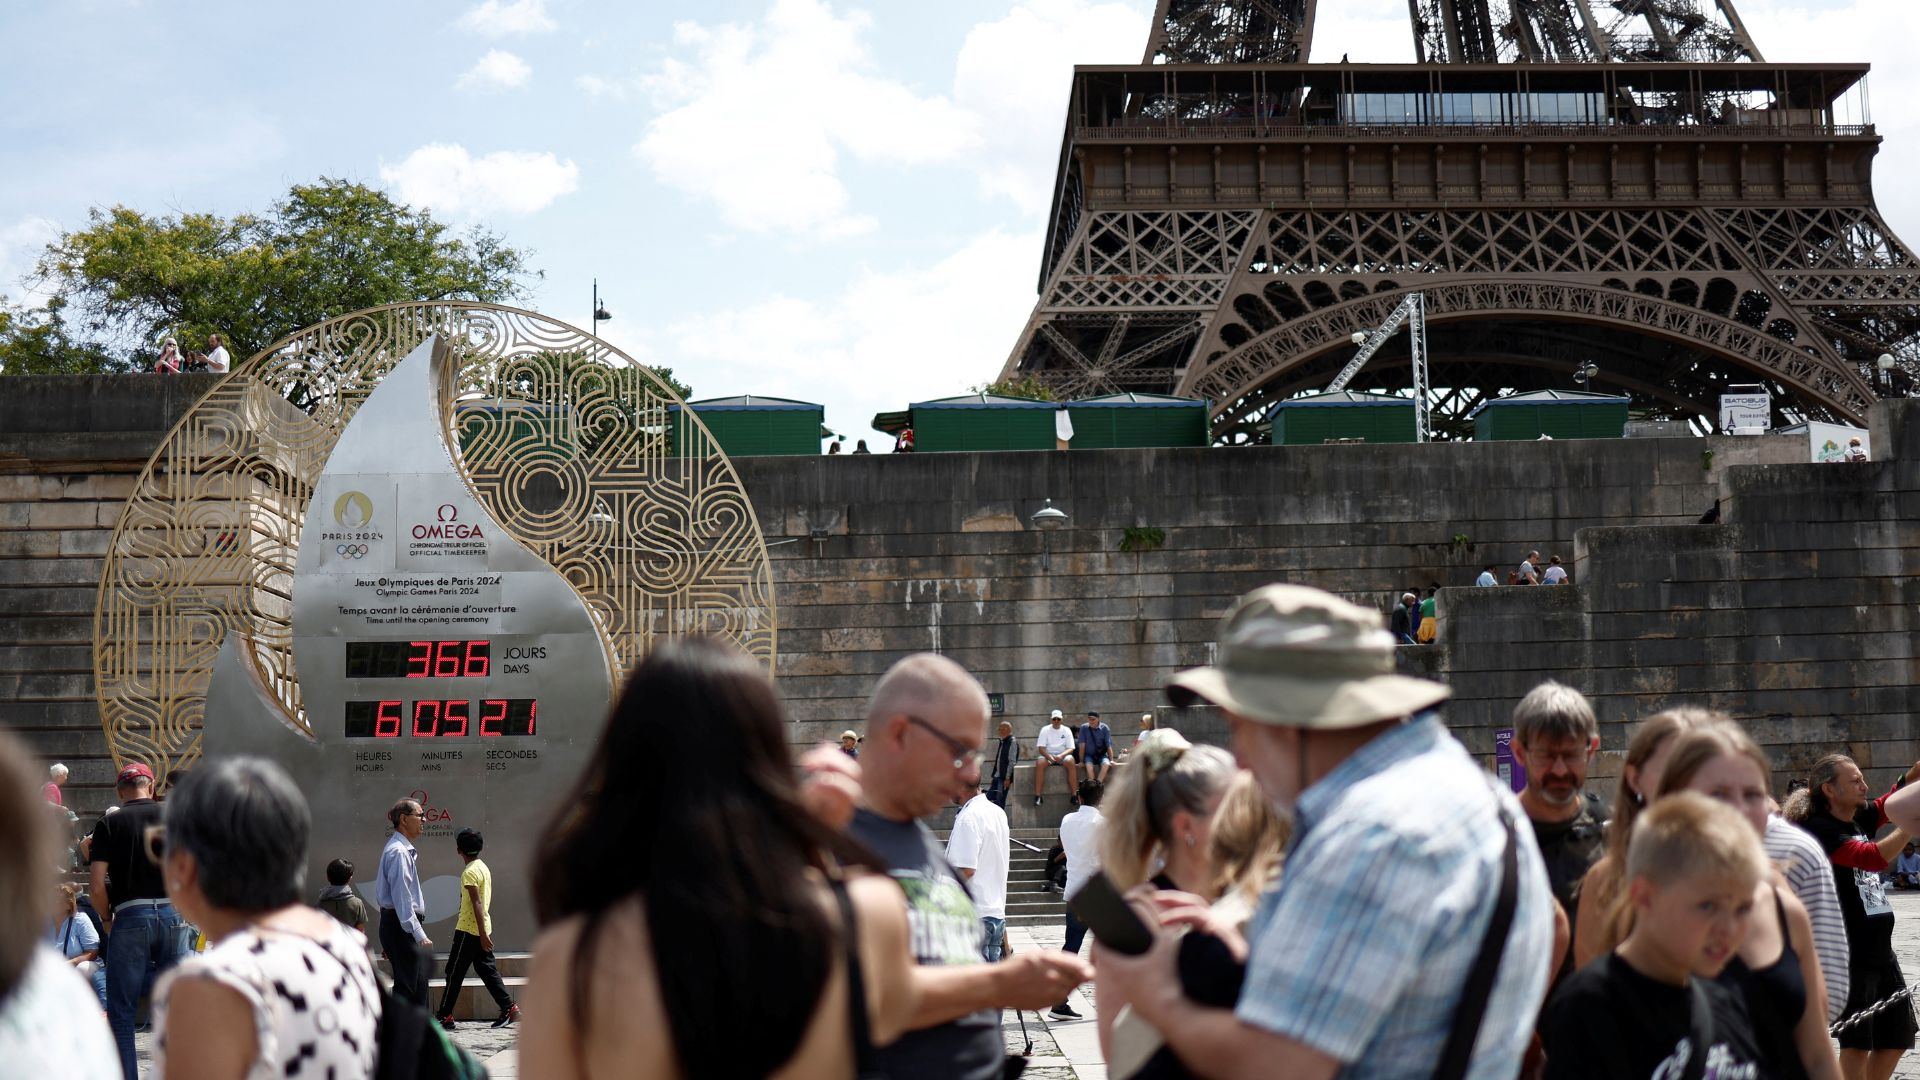  People stand in front of the Olympic countdown clock. /Benoit Tessier/Reuters